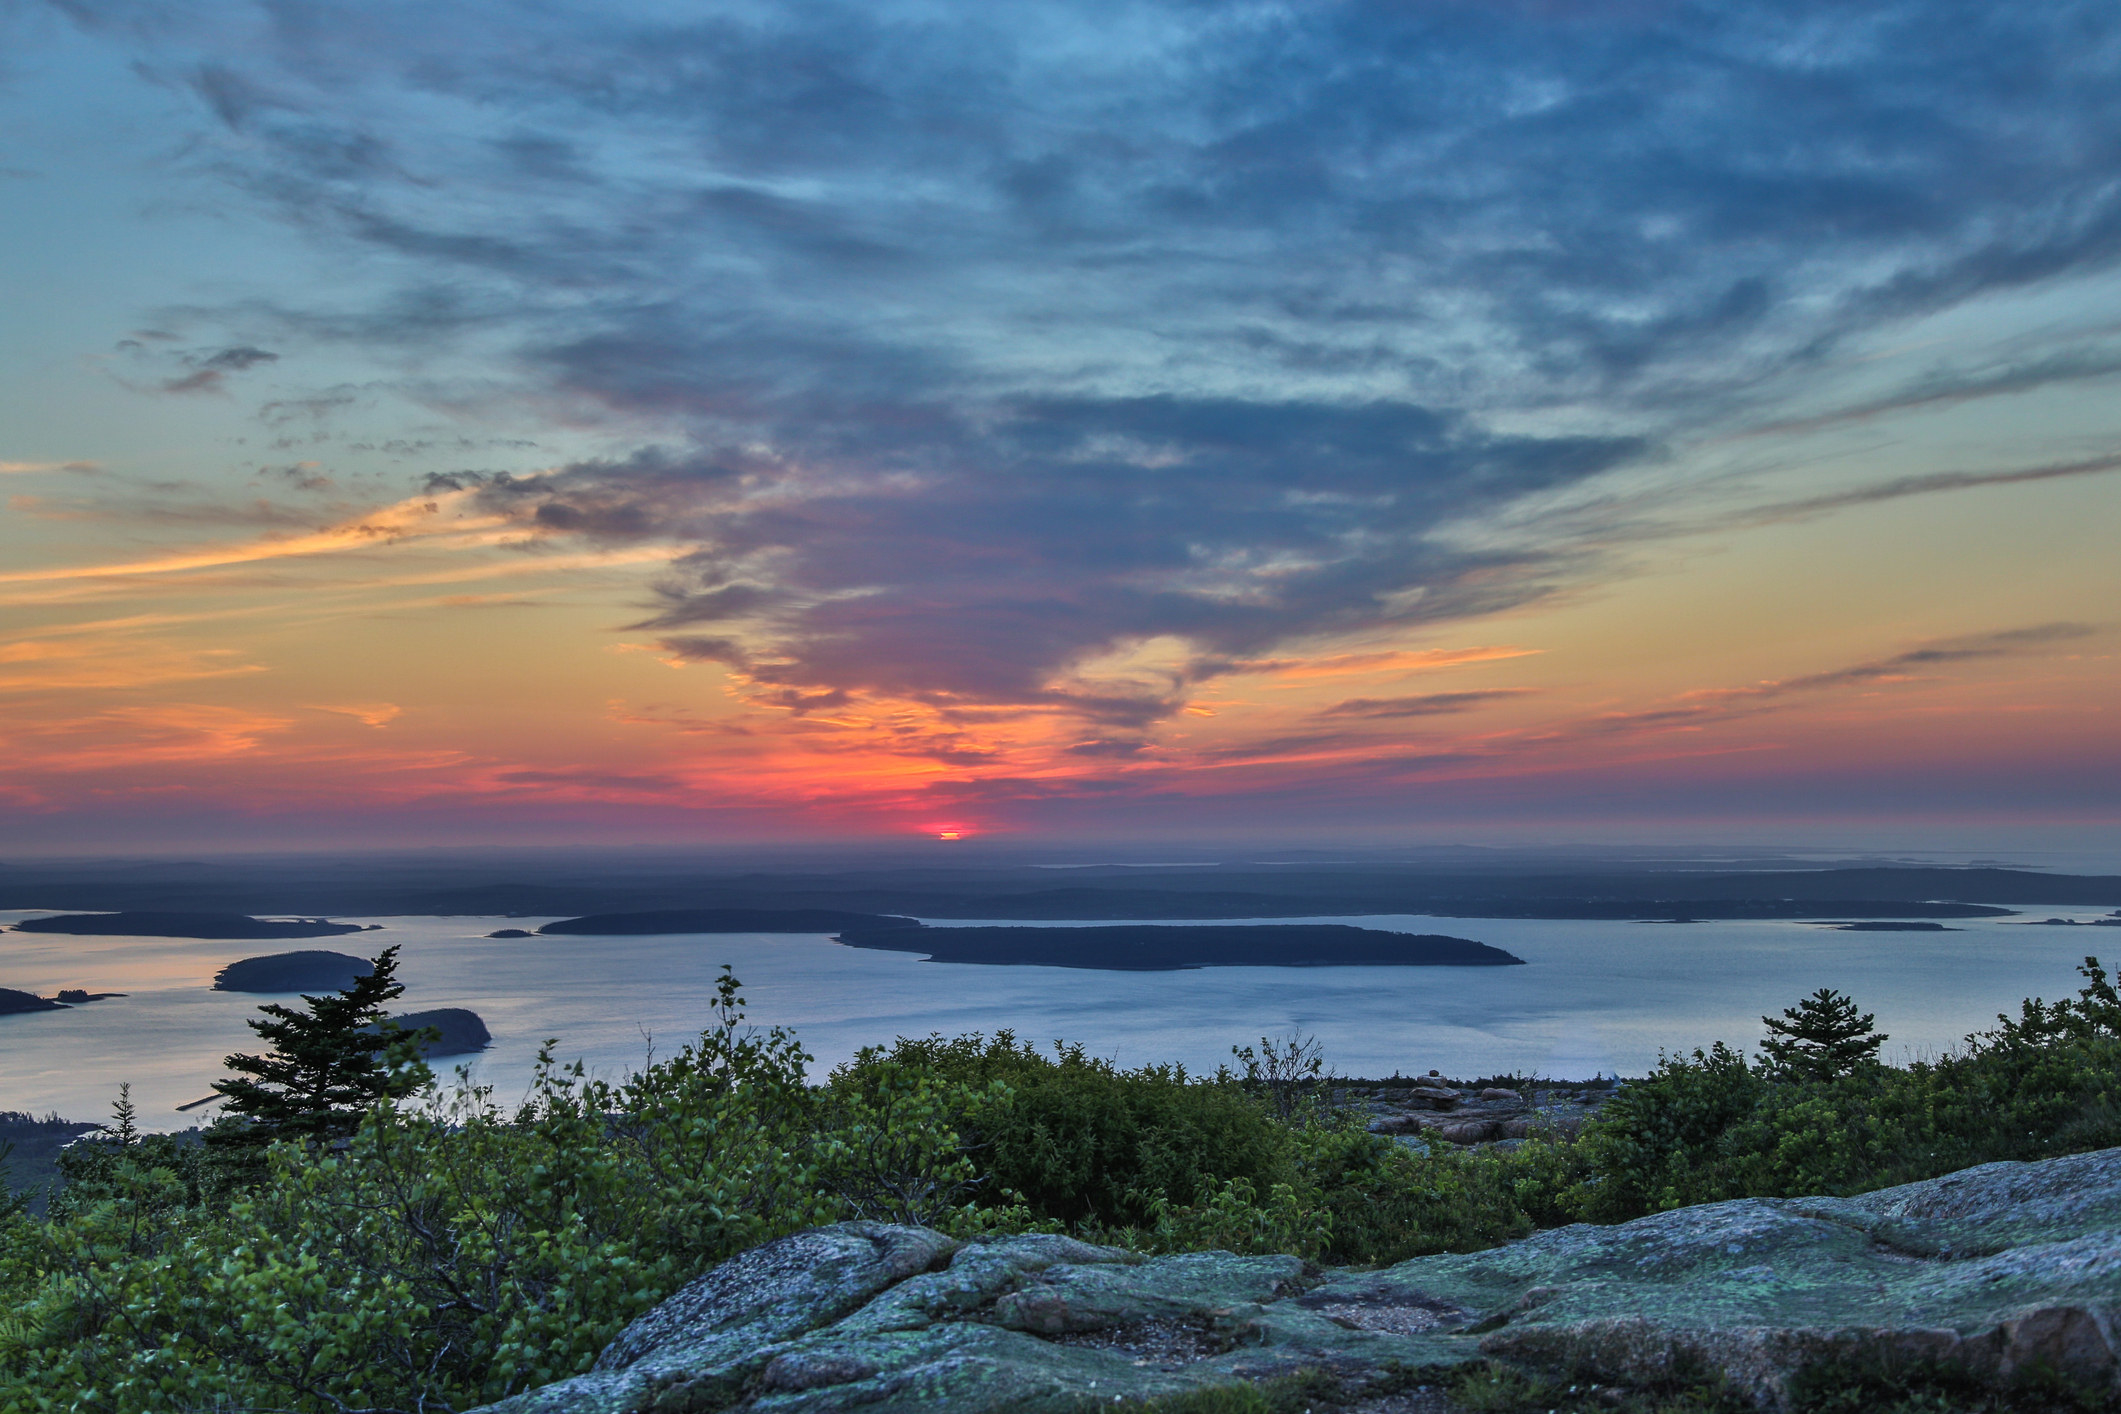 A view of the sun rise at Cadillac Mountain, Acadia National Park.